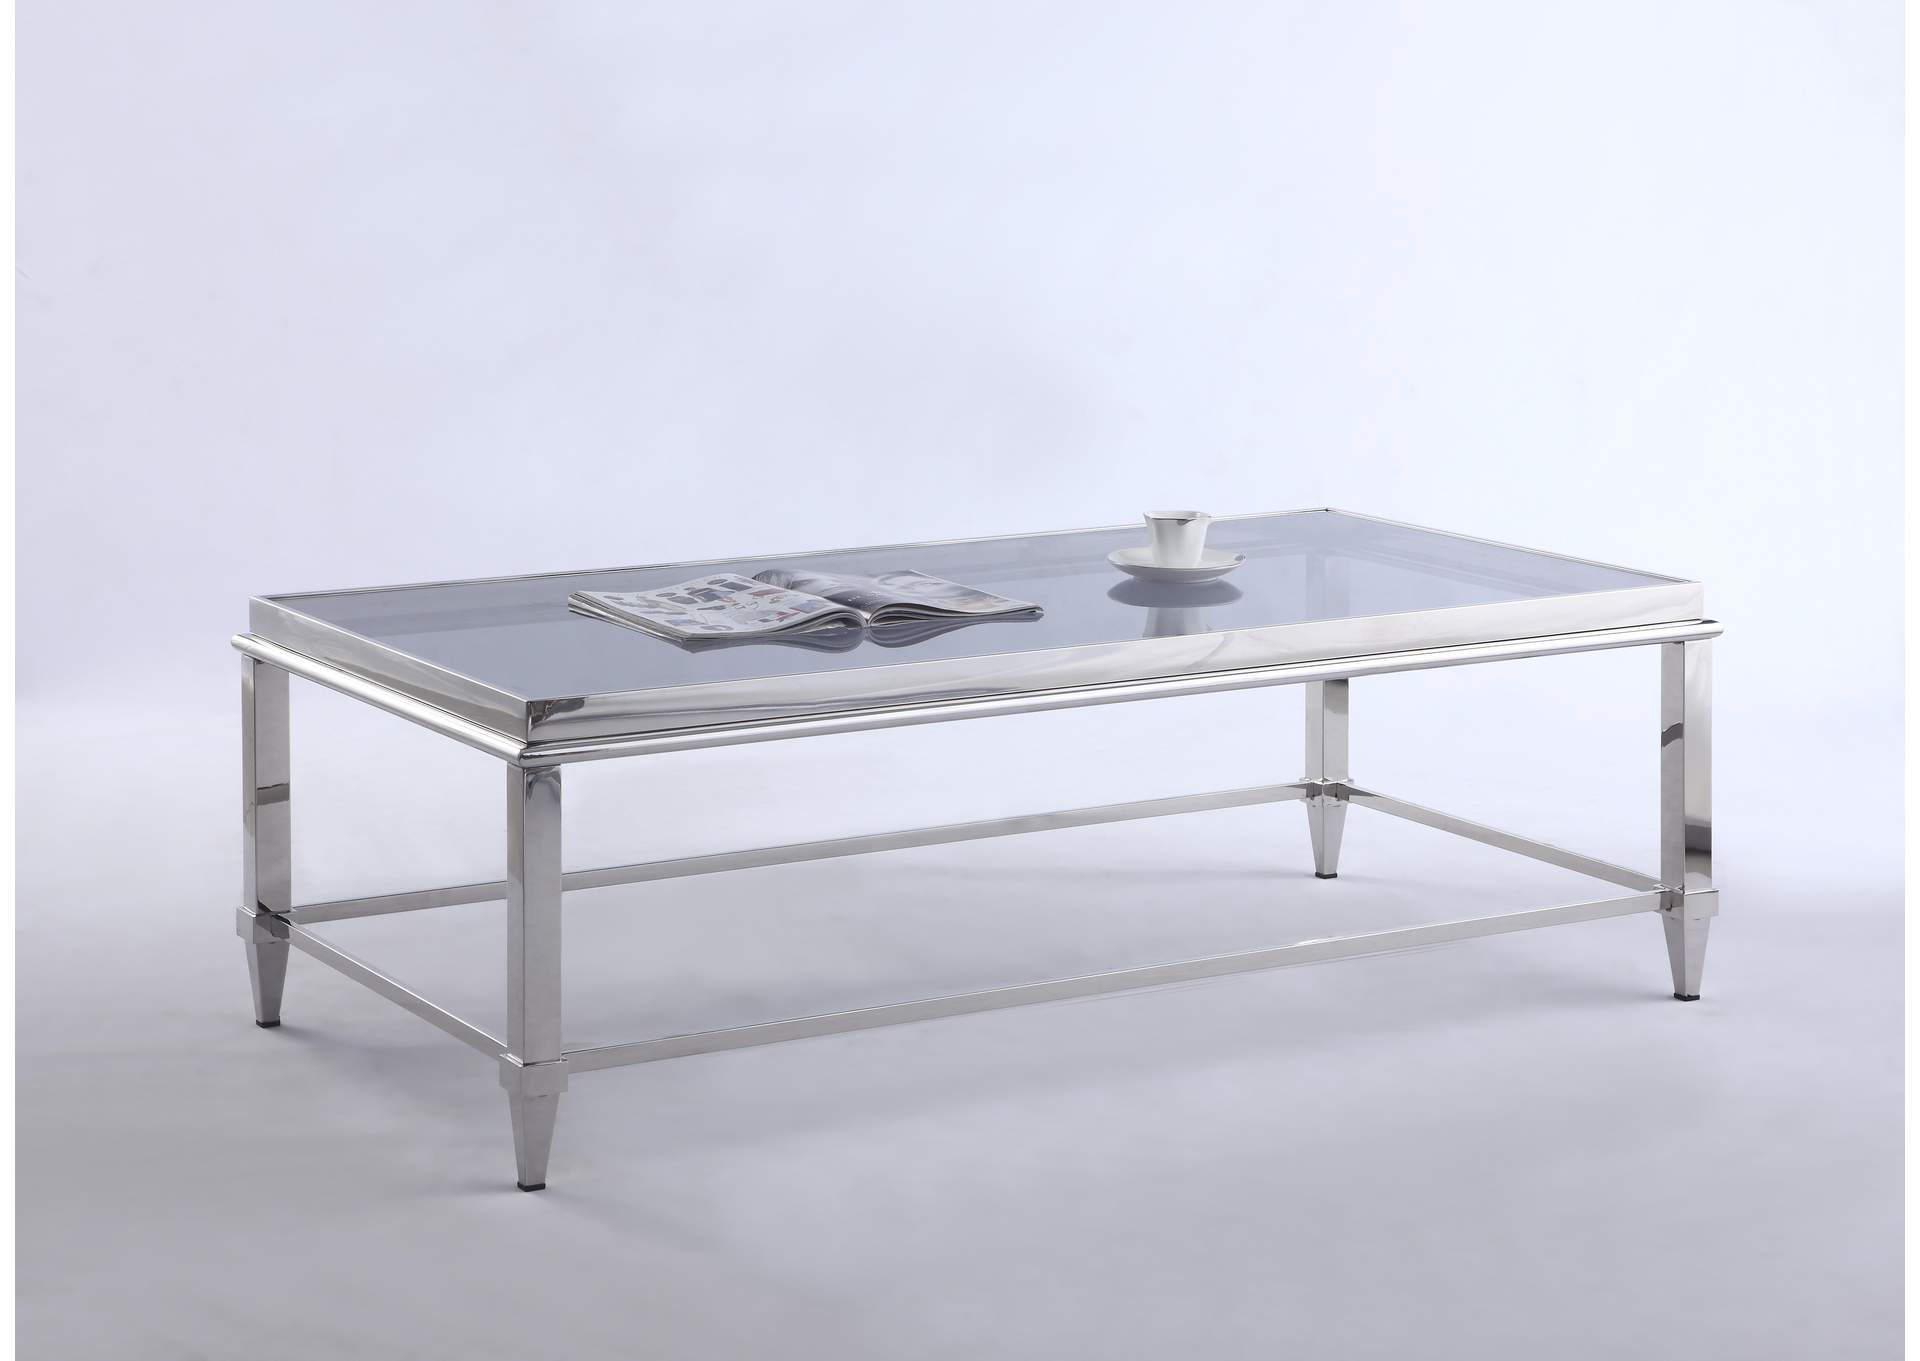 Polished SS Contemporary Rectangular Cocktail Table w/ Glass Top & Gray Trim,Chintaly Imports